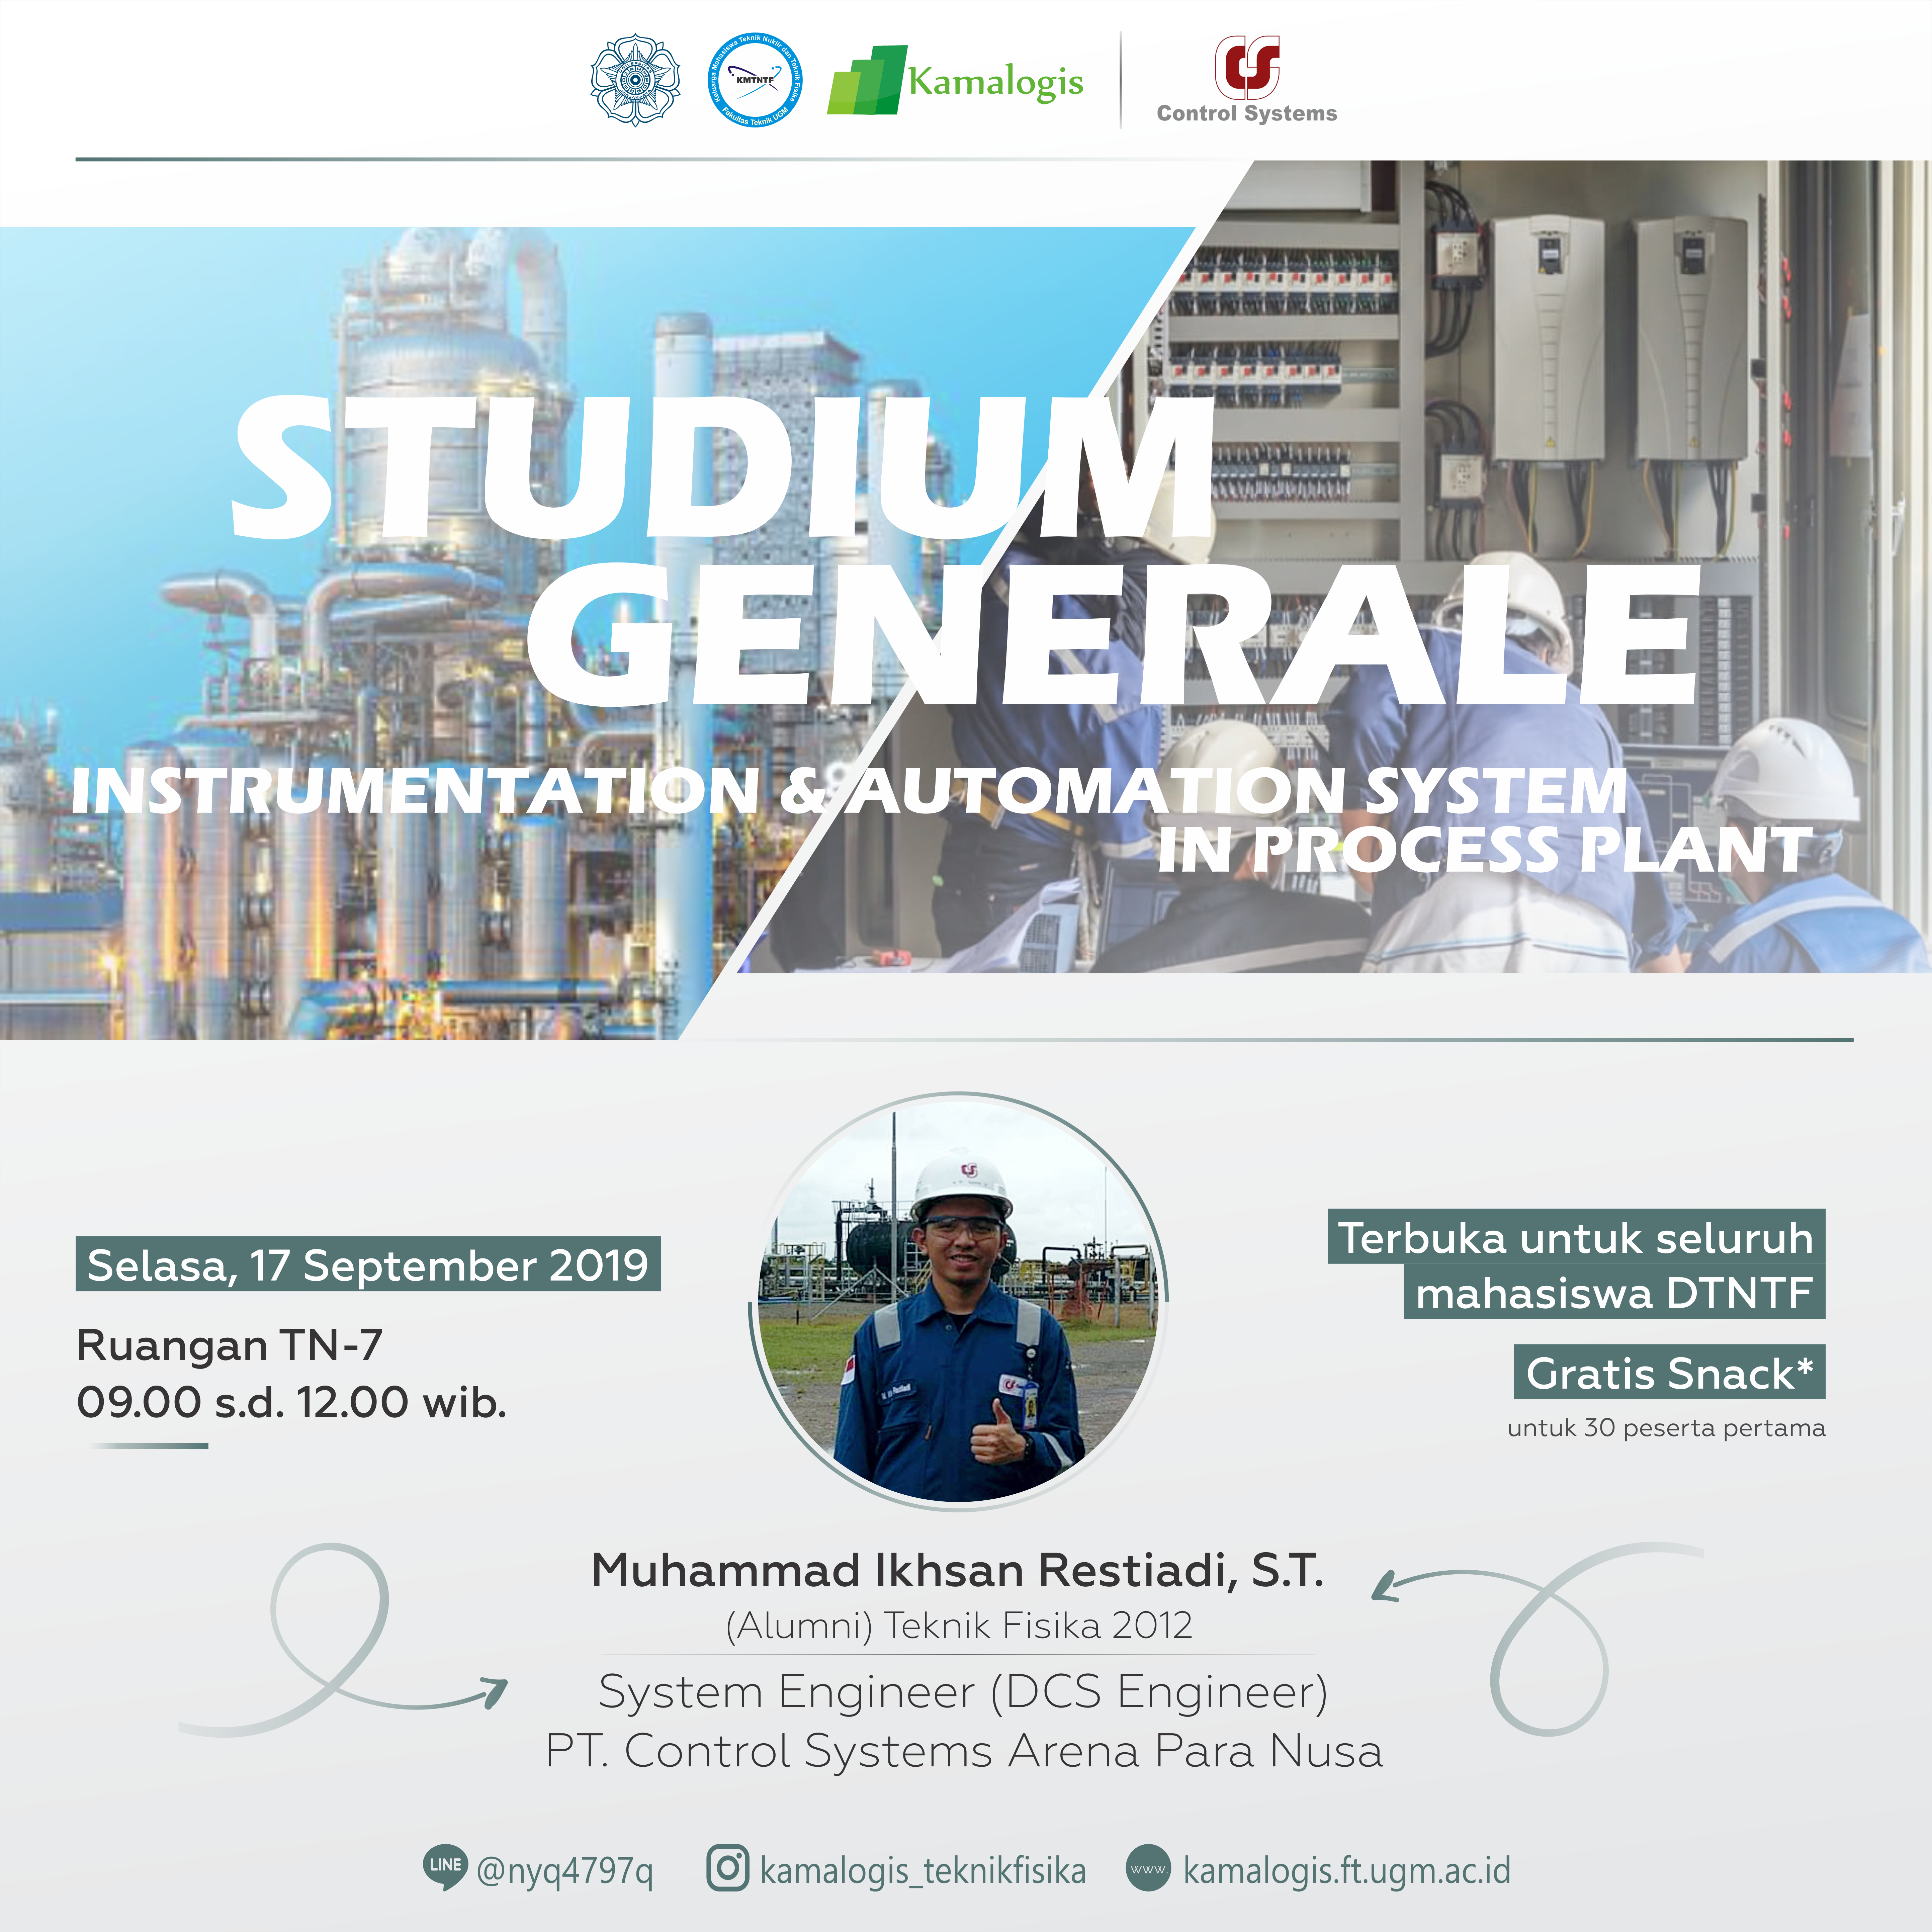 Studium Generale: Instrumentation & Automation System in Process Plant